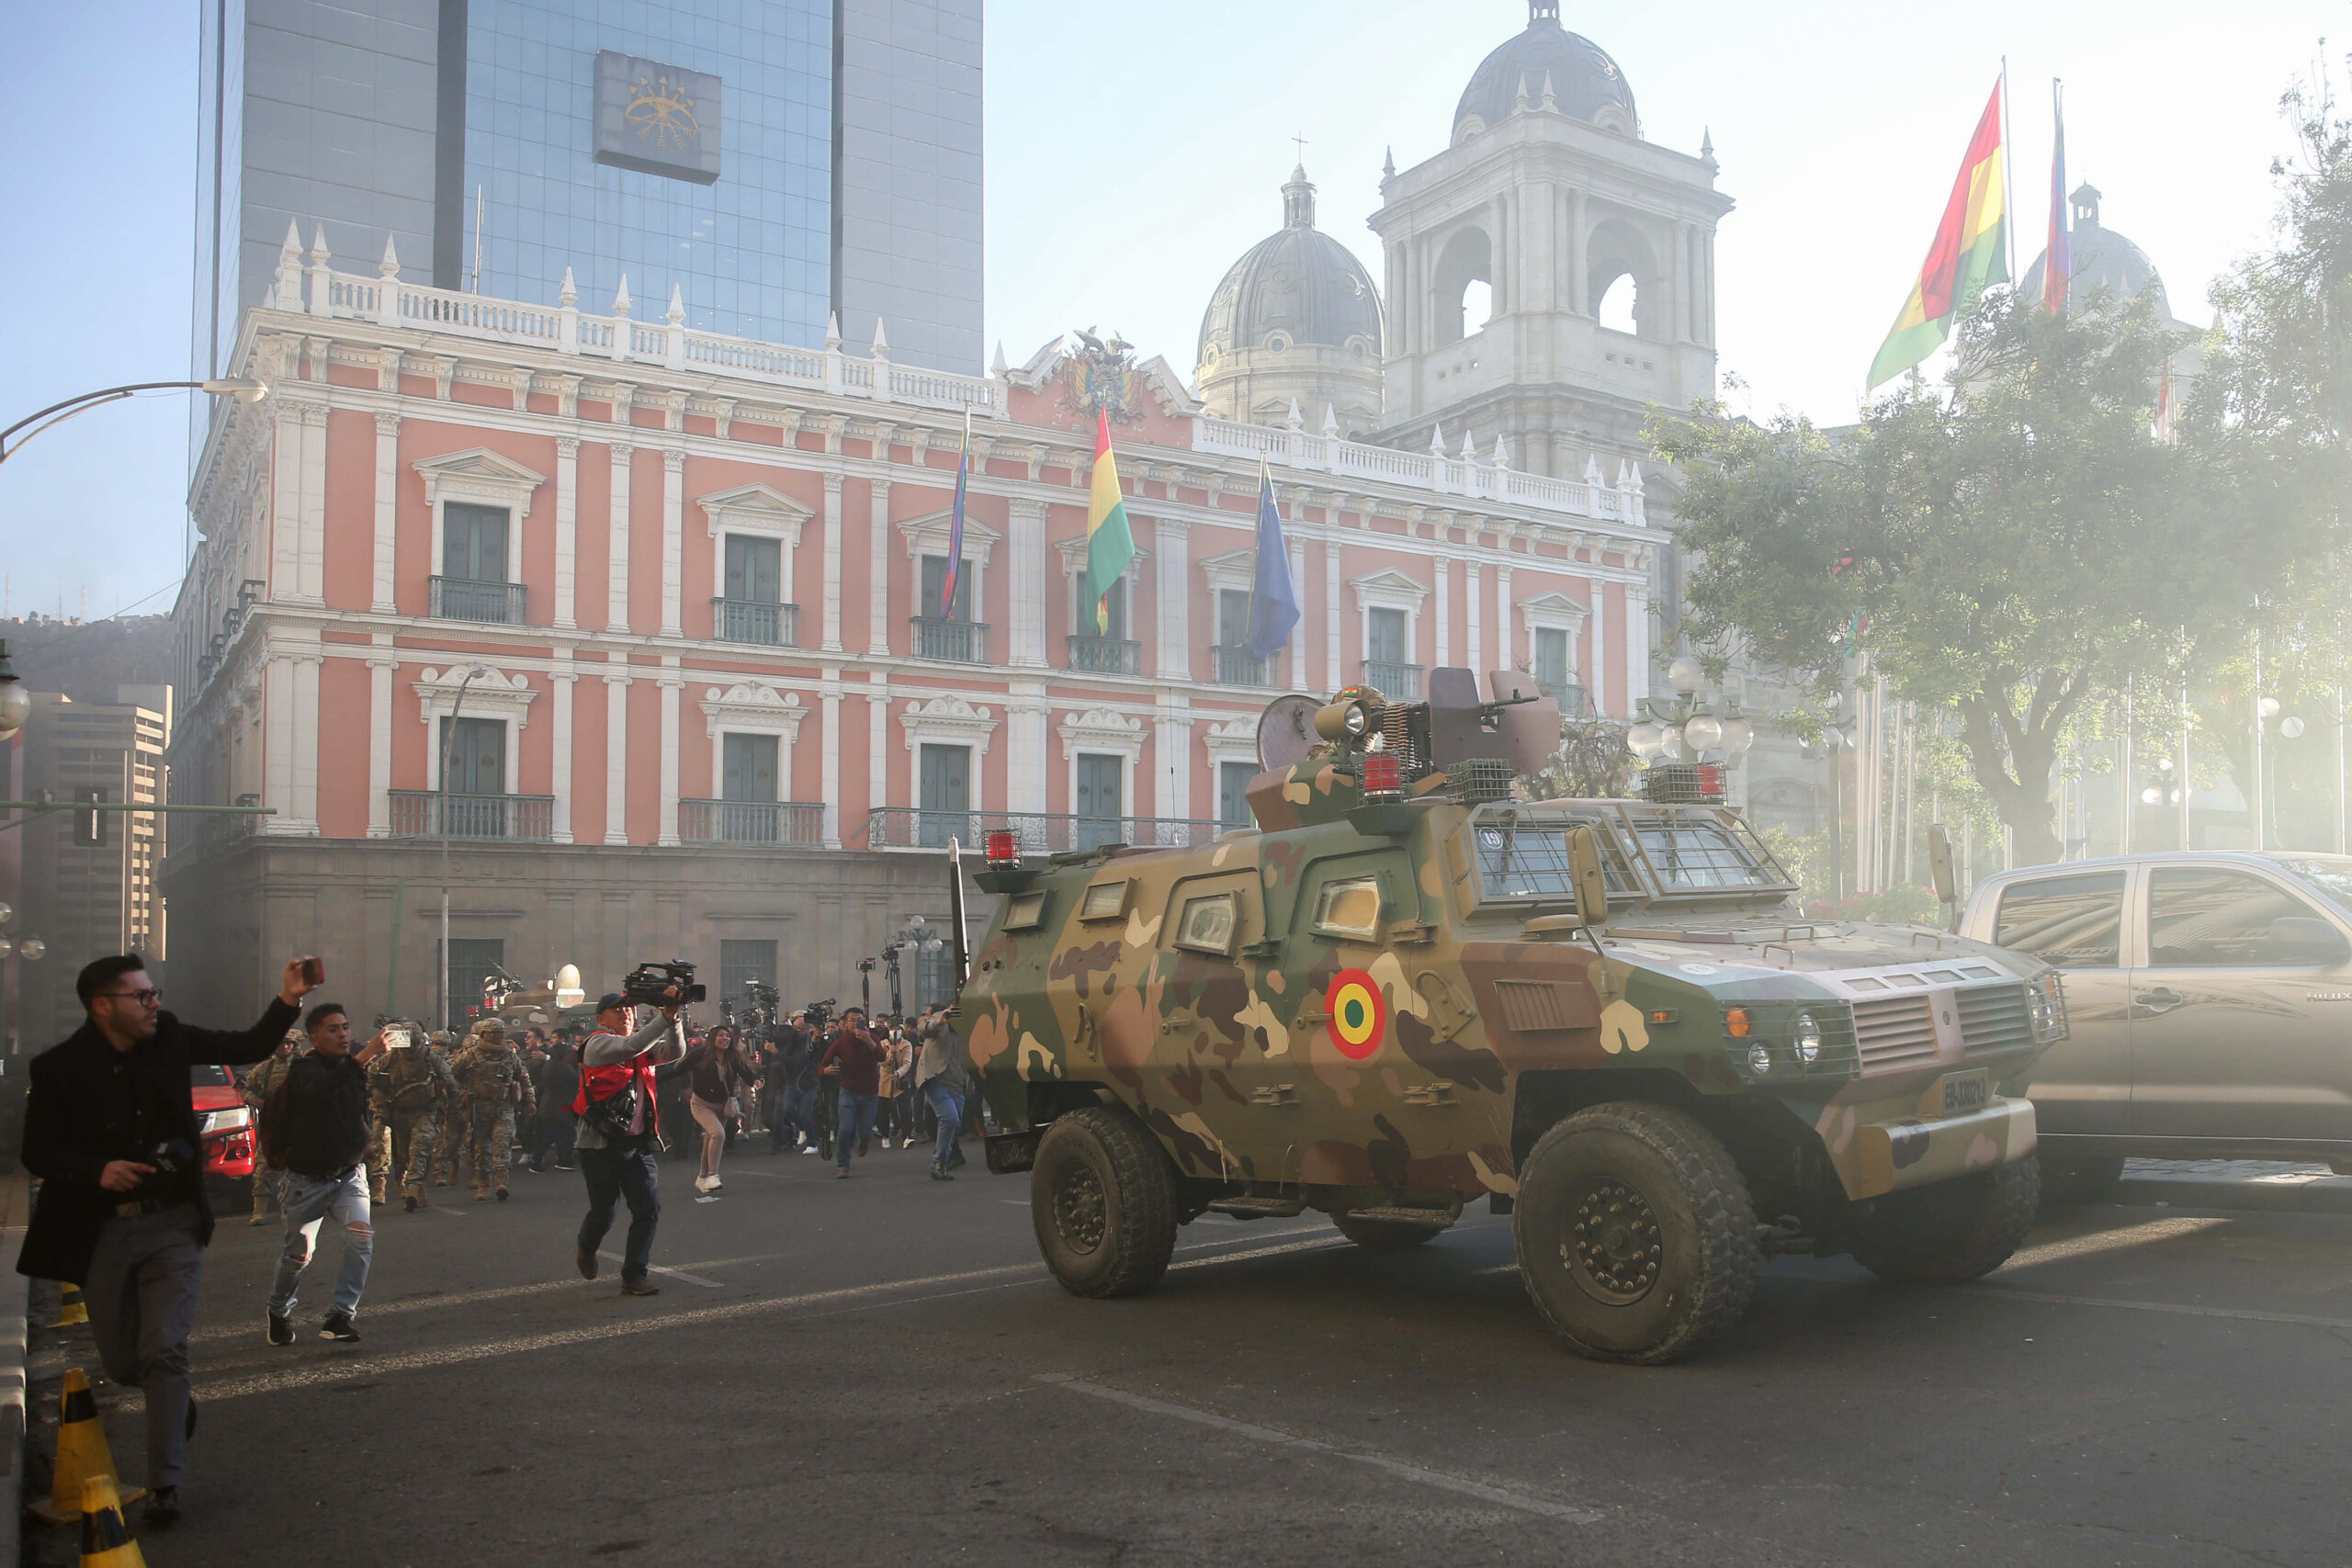 coup attempt epitomizes political crisis in bolivia